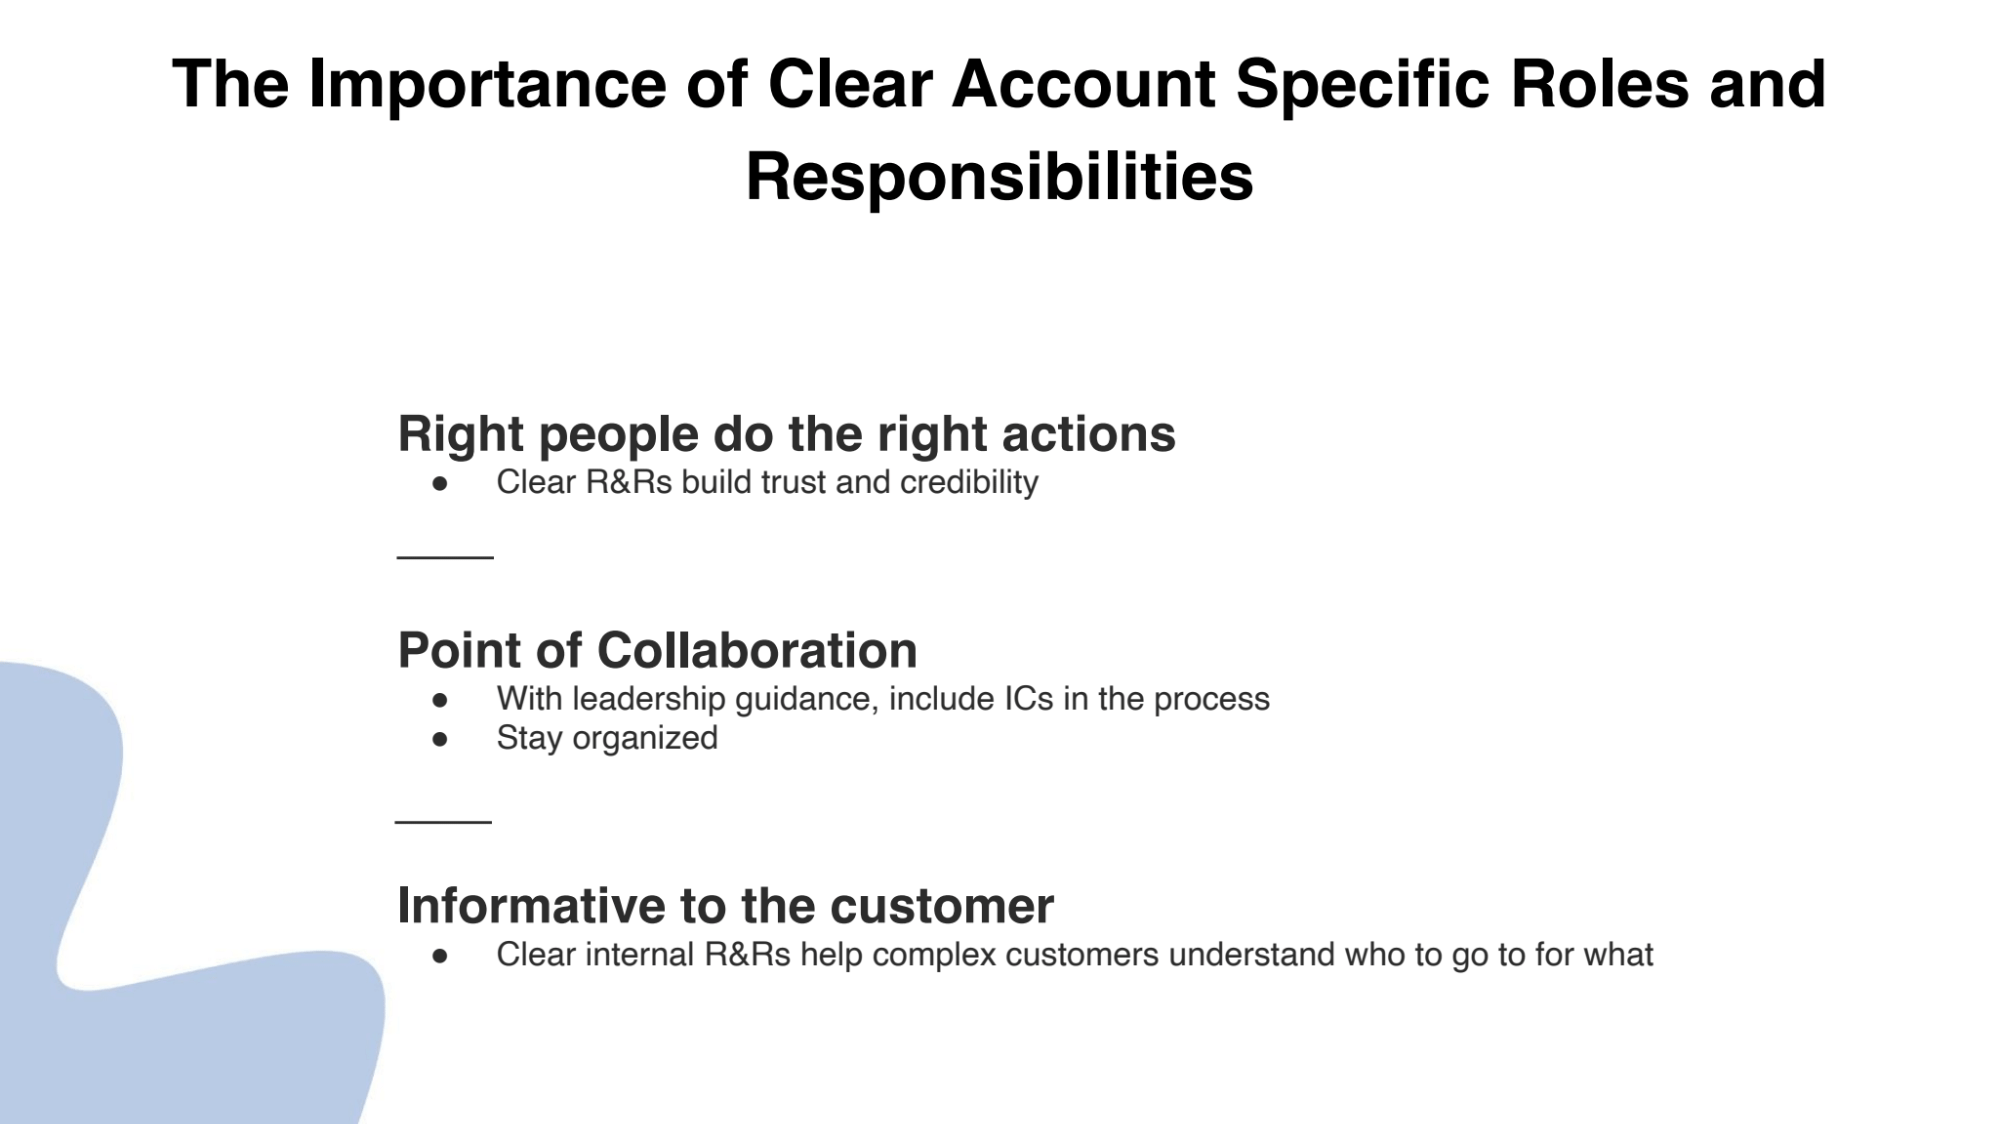 The importance of clear account specific roles and responsibilities